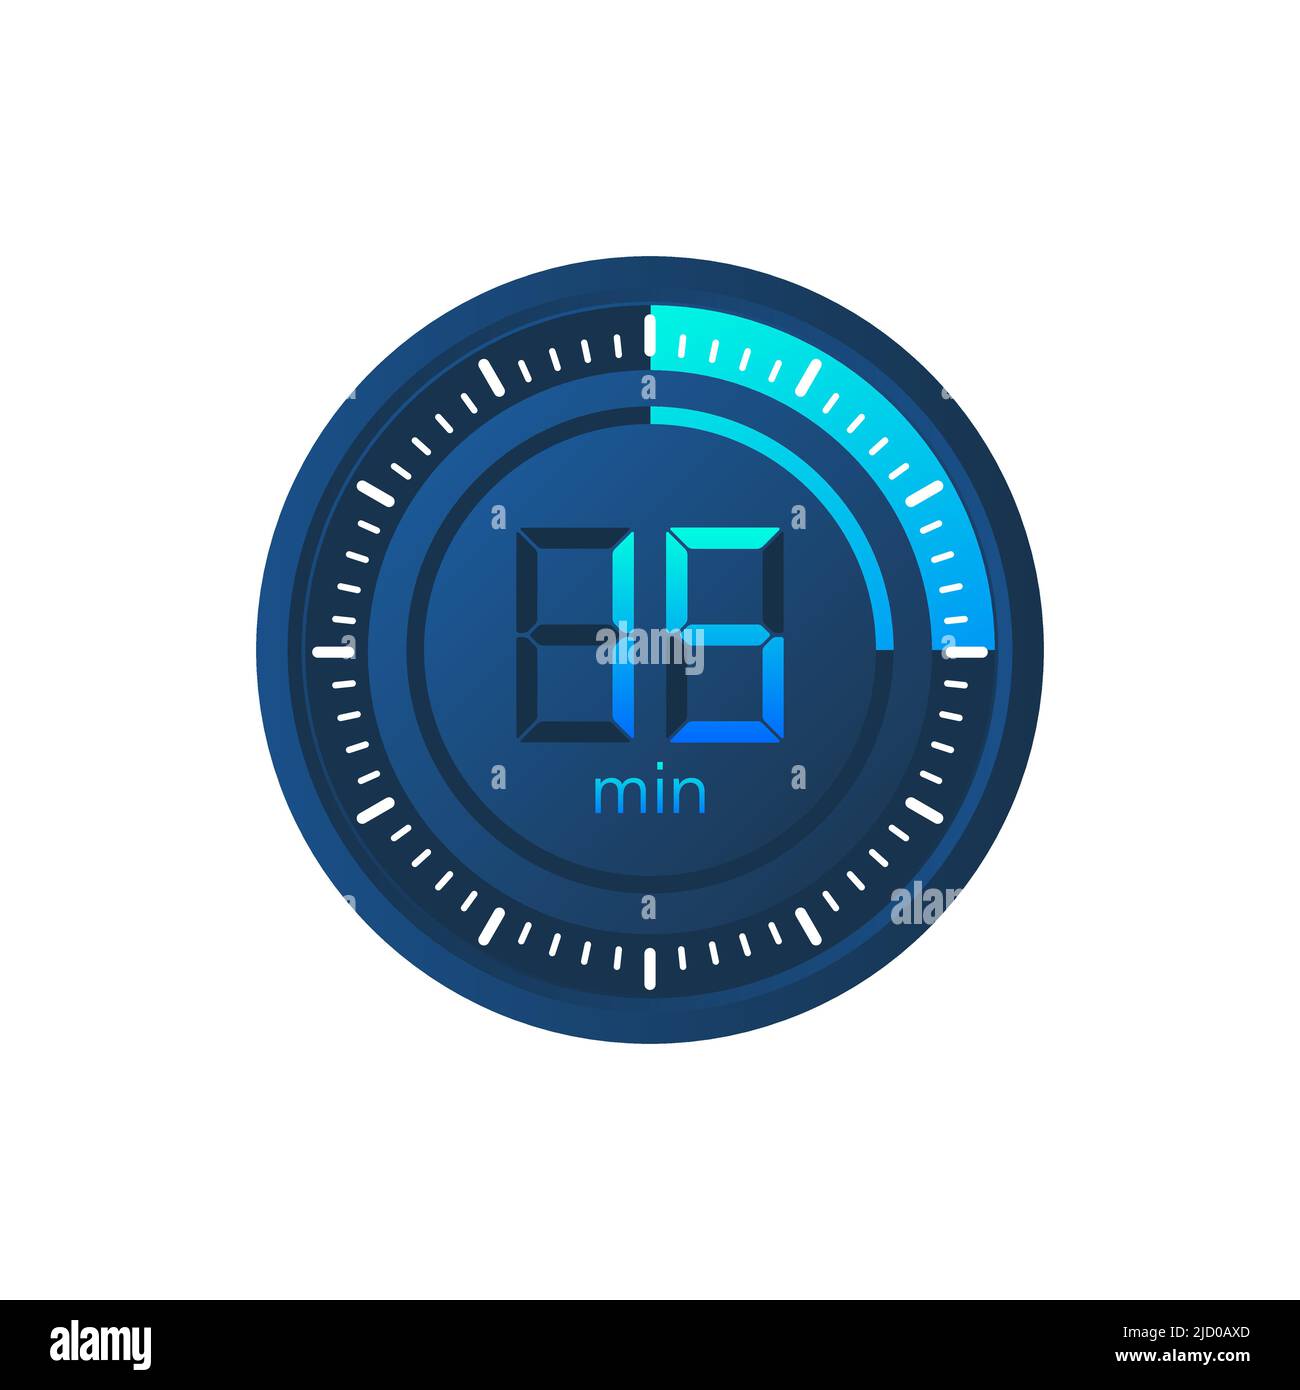 The 15 minutes, stopwatch vector icon. Stopwatch icon in flat style on a white background. Vector stock illustration. Stock Vector